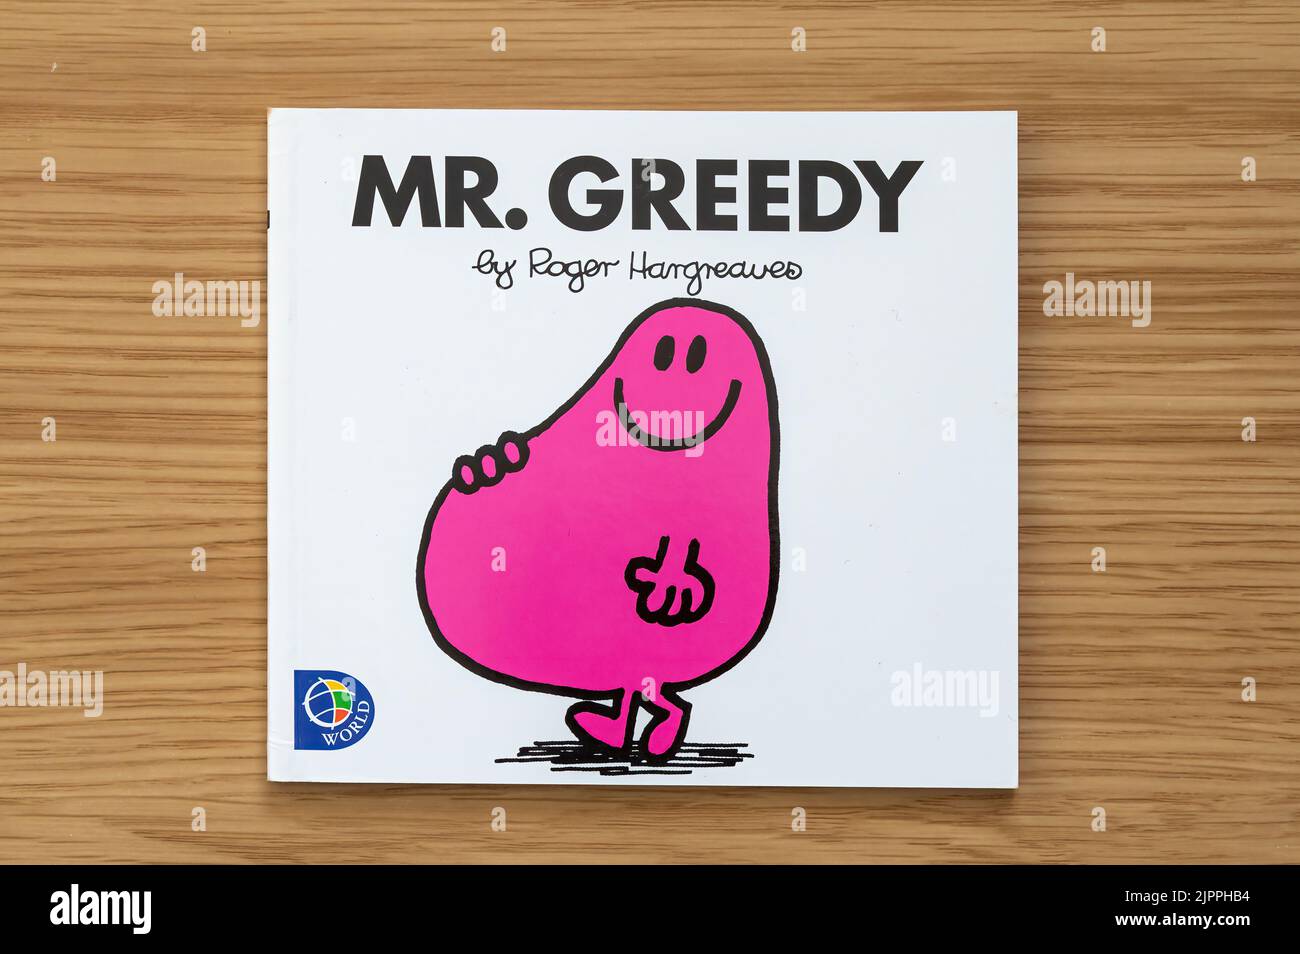 CHESTER, UNITED KINGDOM - JULY 31ST 2022: Mr Greedy, front cover of Mr Men series of books Stock Photo